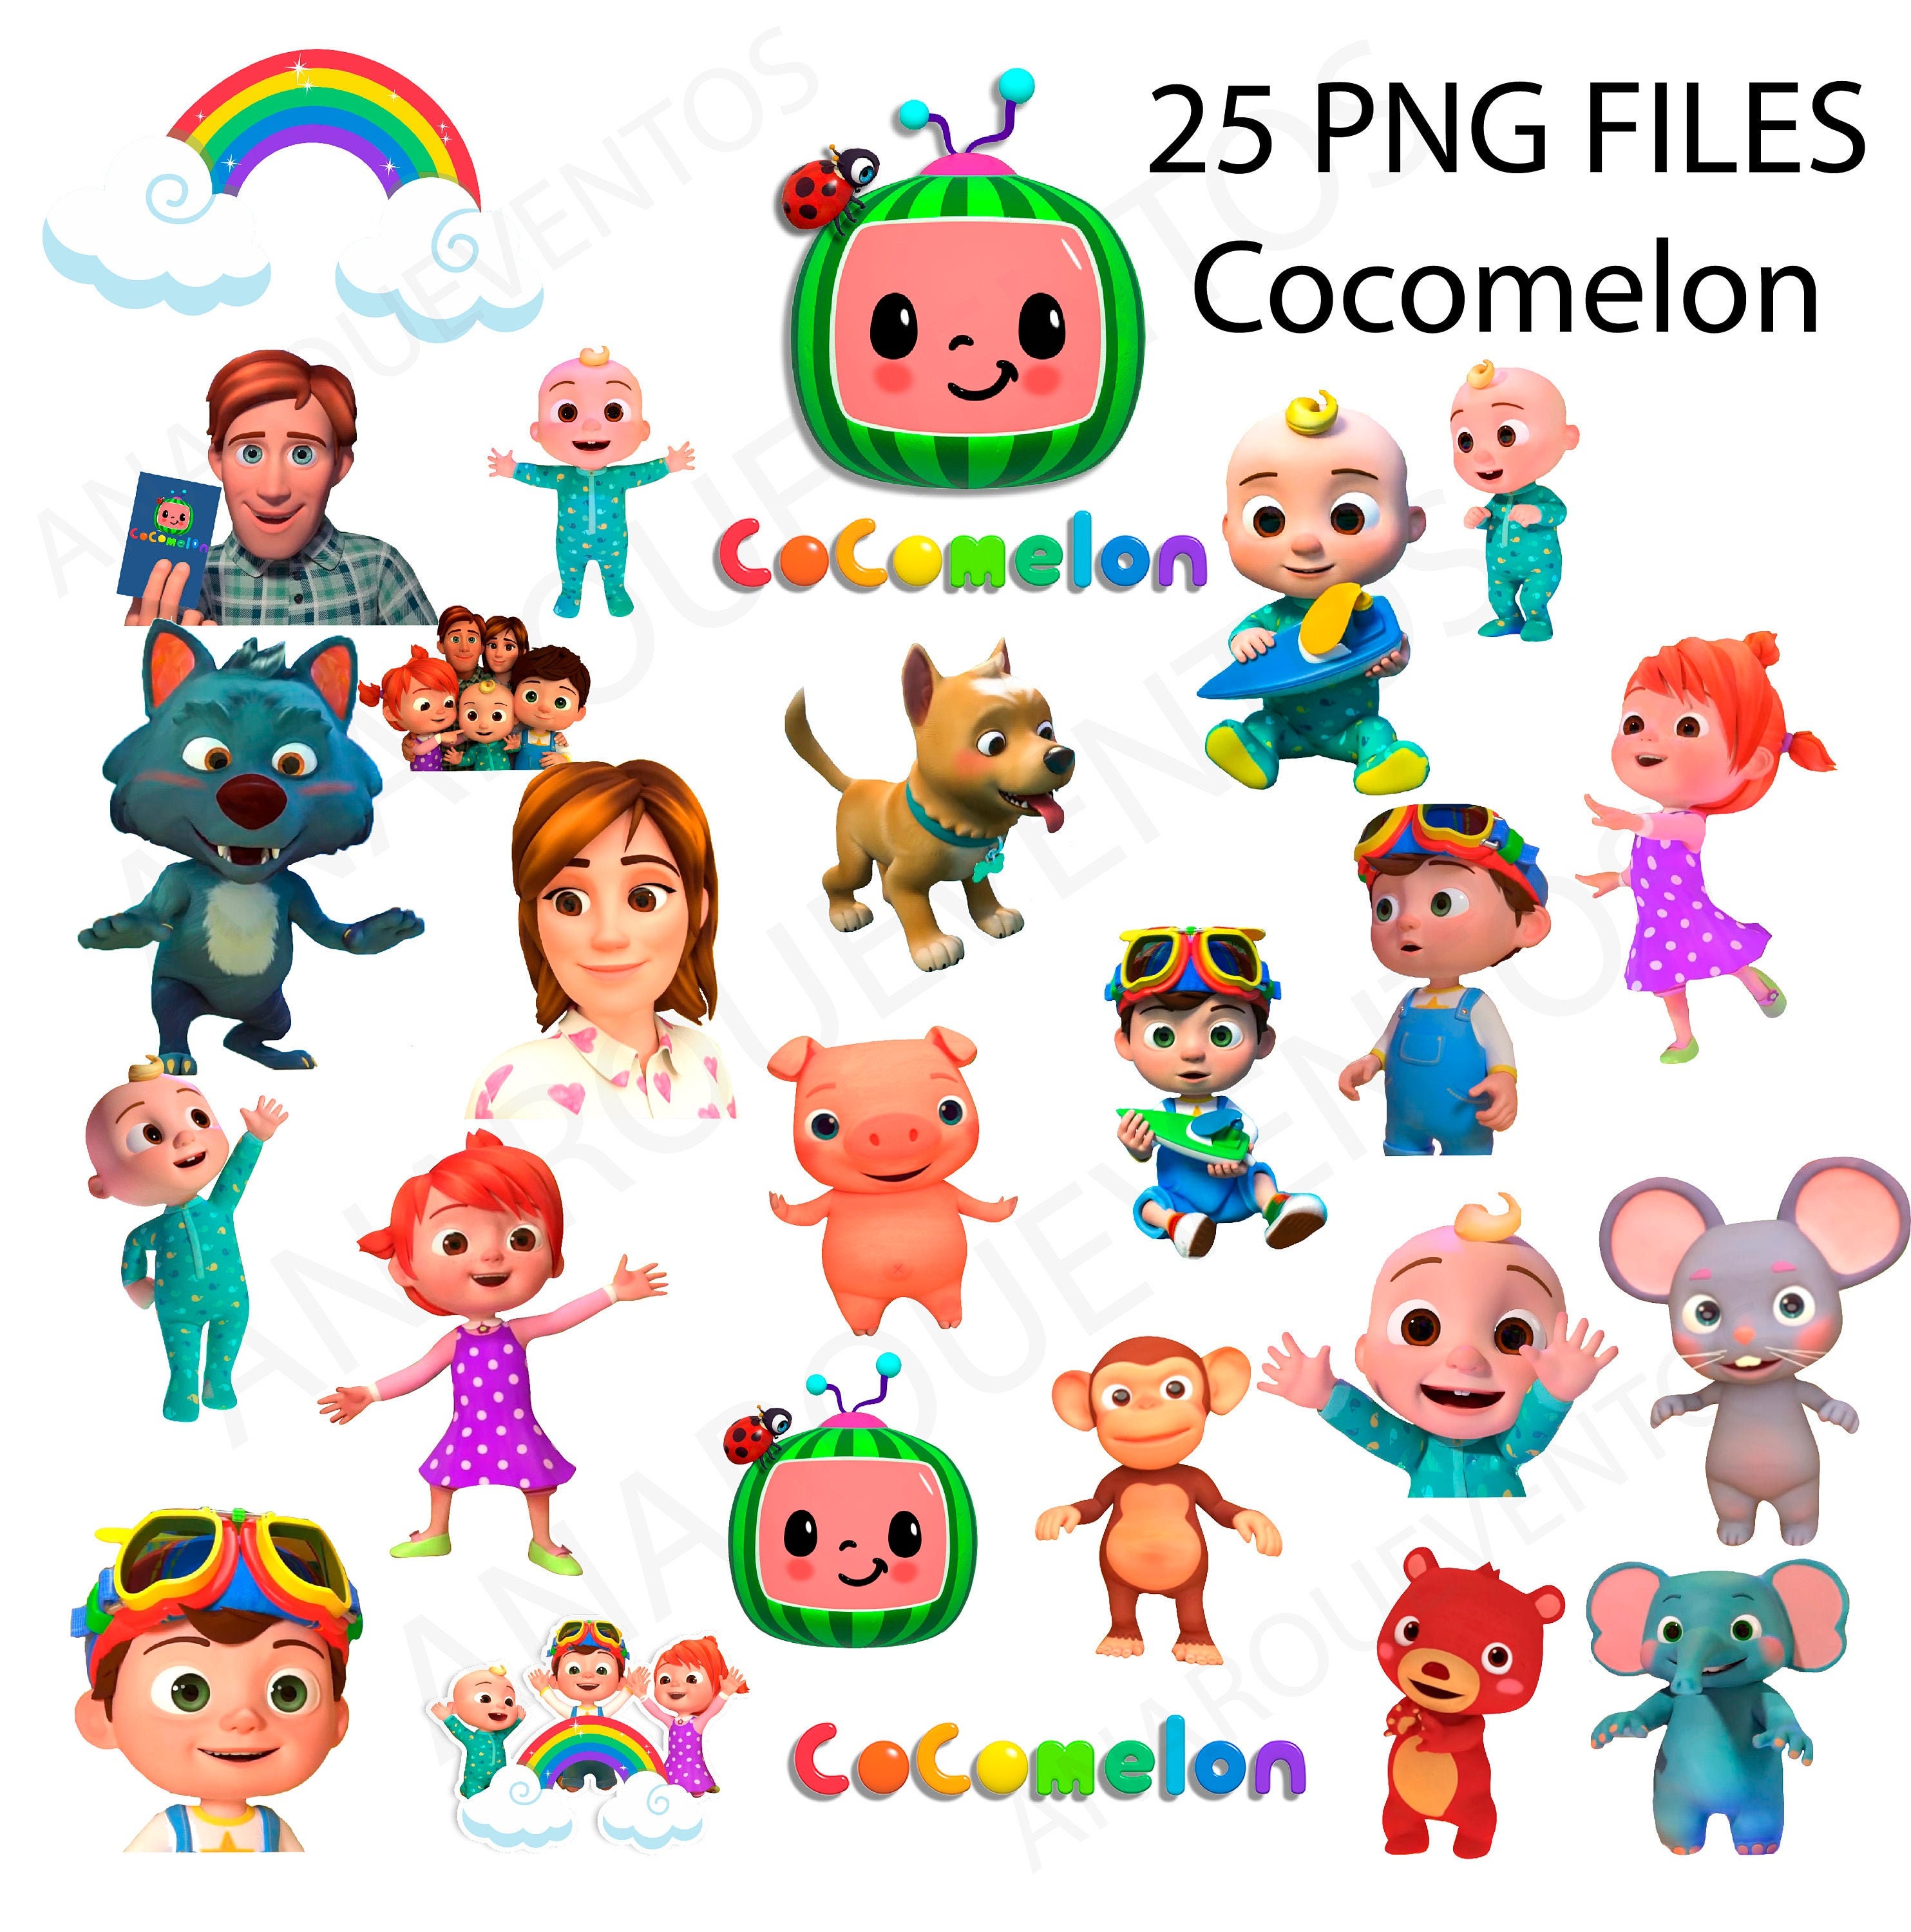 25 PNG files Cocomelon instant download | Etsy